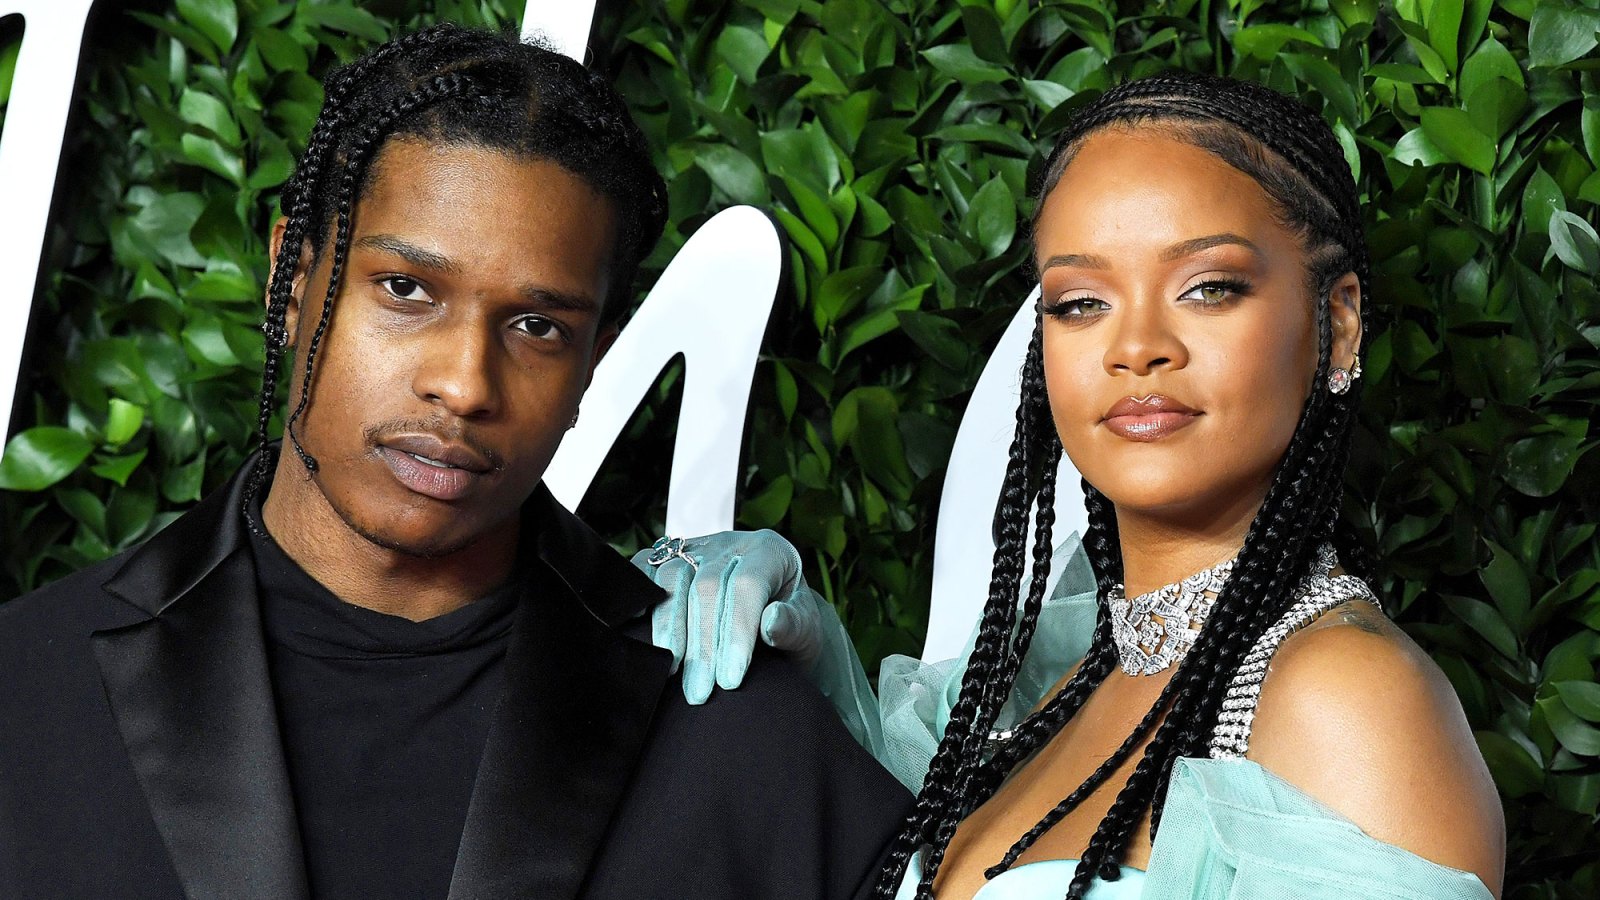 Theres Nothing Romantic Between A$AP Rocky and Rihanna